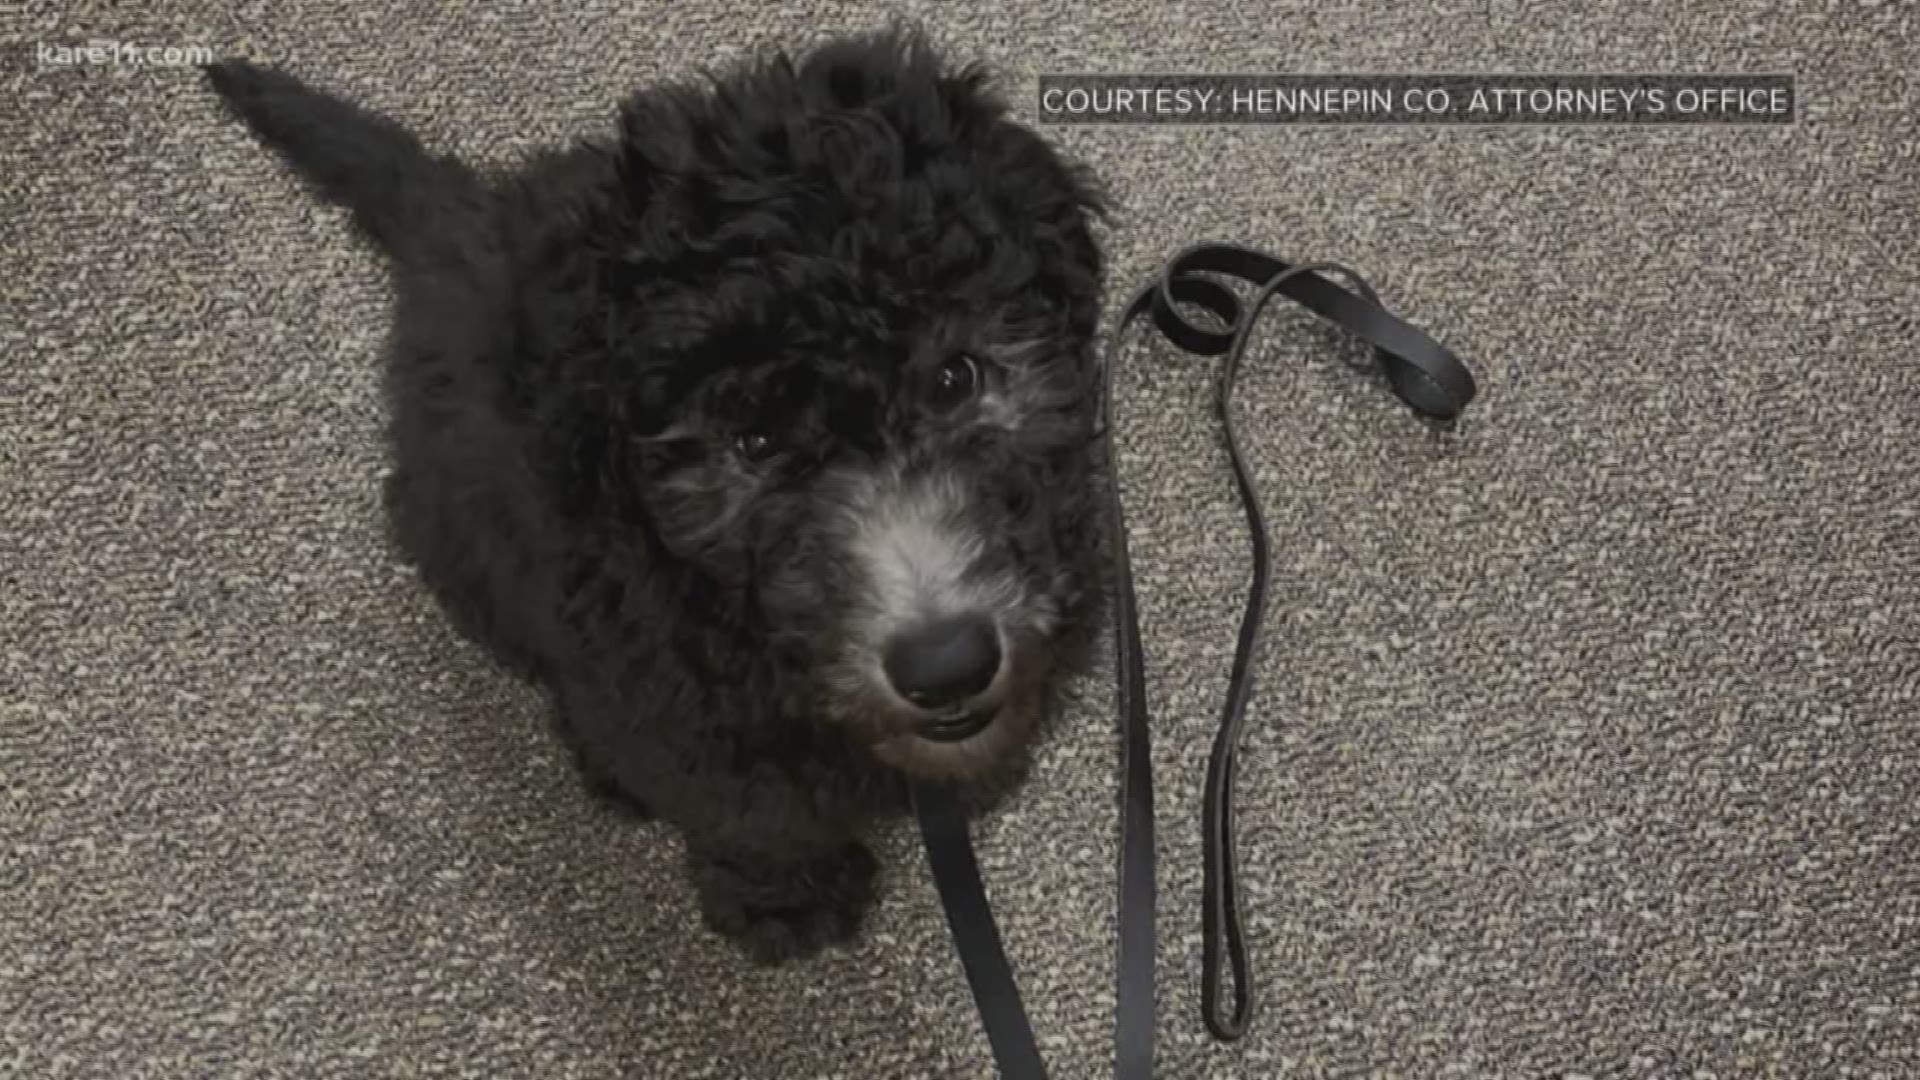 Meet the new 'emotional support' dog at the Hennepin Co. Attorney's Office  